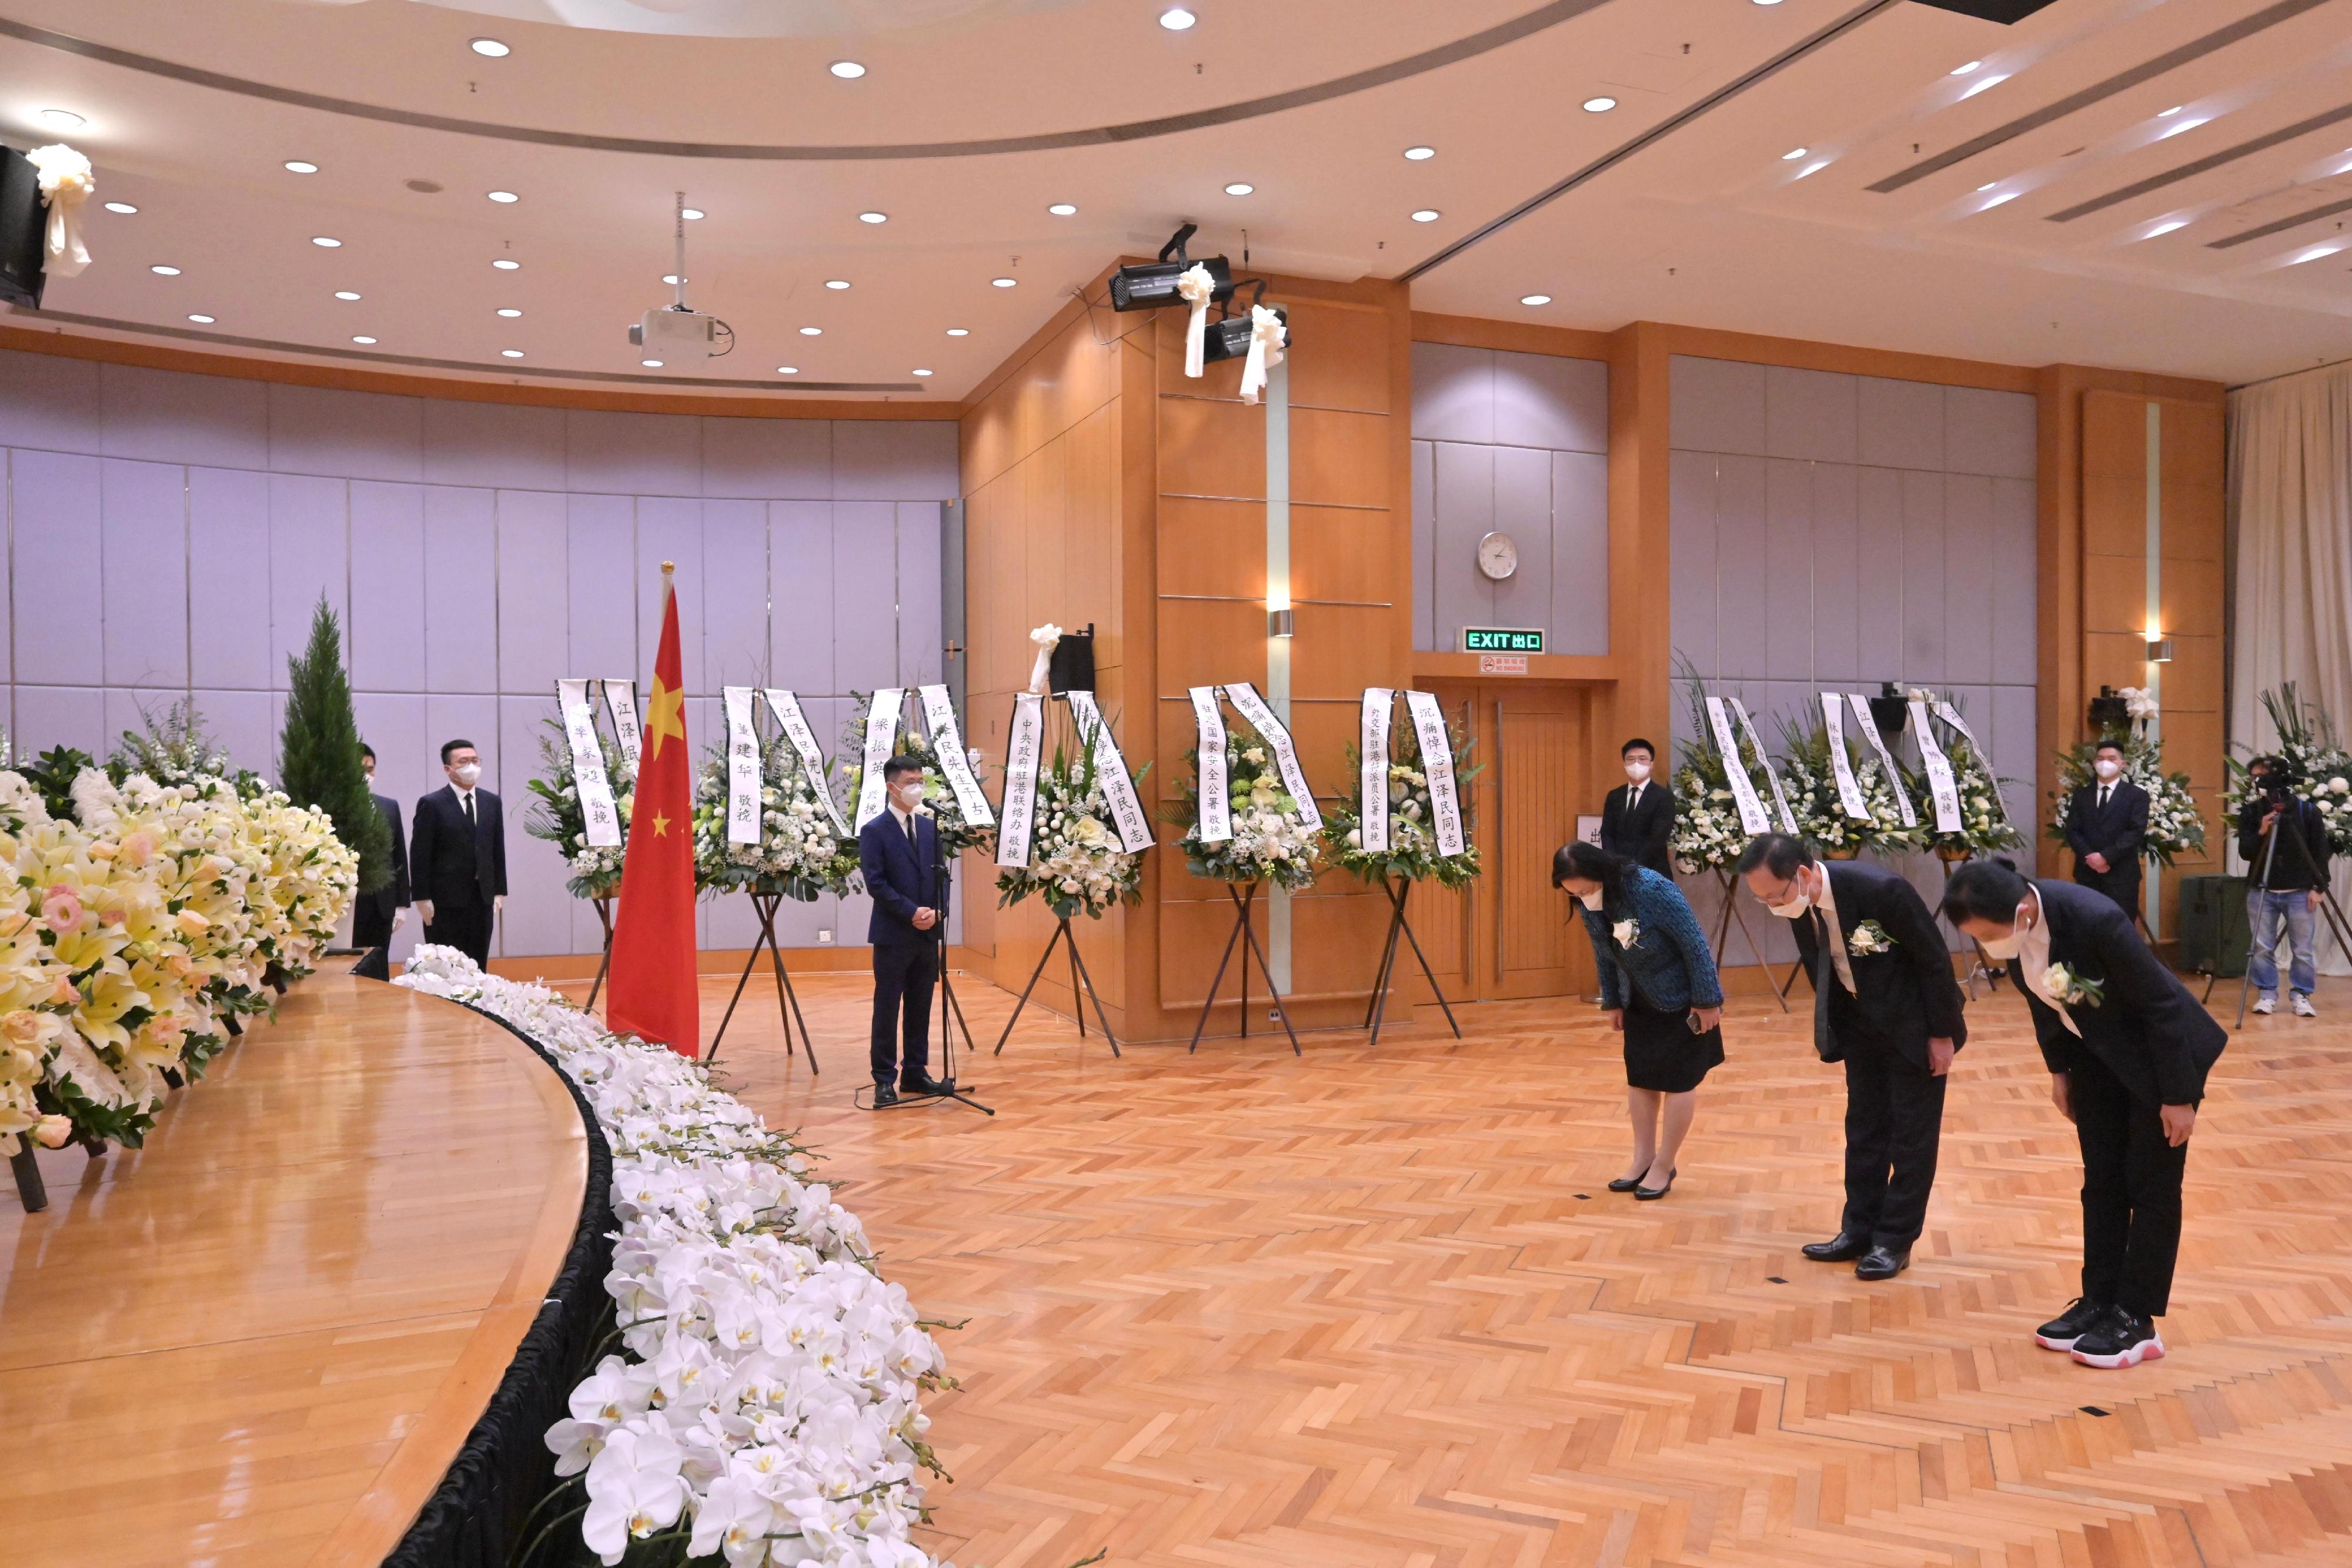 The Liaison Office of the Central People's Government in the Hong Kong Special Administrative Region set up a mourning hall inside its office building for the late Former President of the People's Republic of China, Mr Jiang Zemin. Photo shows (from left) Non-official Members of the Executive Council Mrs Margaret Leung, Mr Chan Kin-por and Dr Eliza Chan paying tribute and expressing profound condolences over President Jiang's passing.